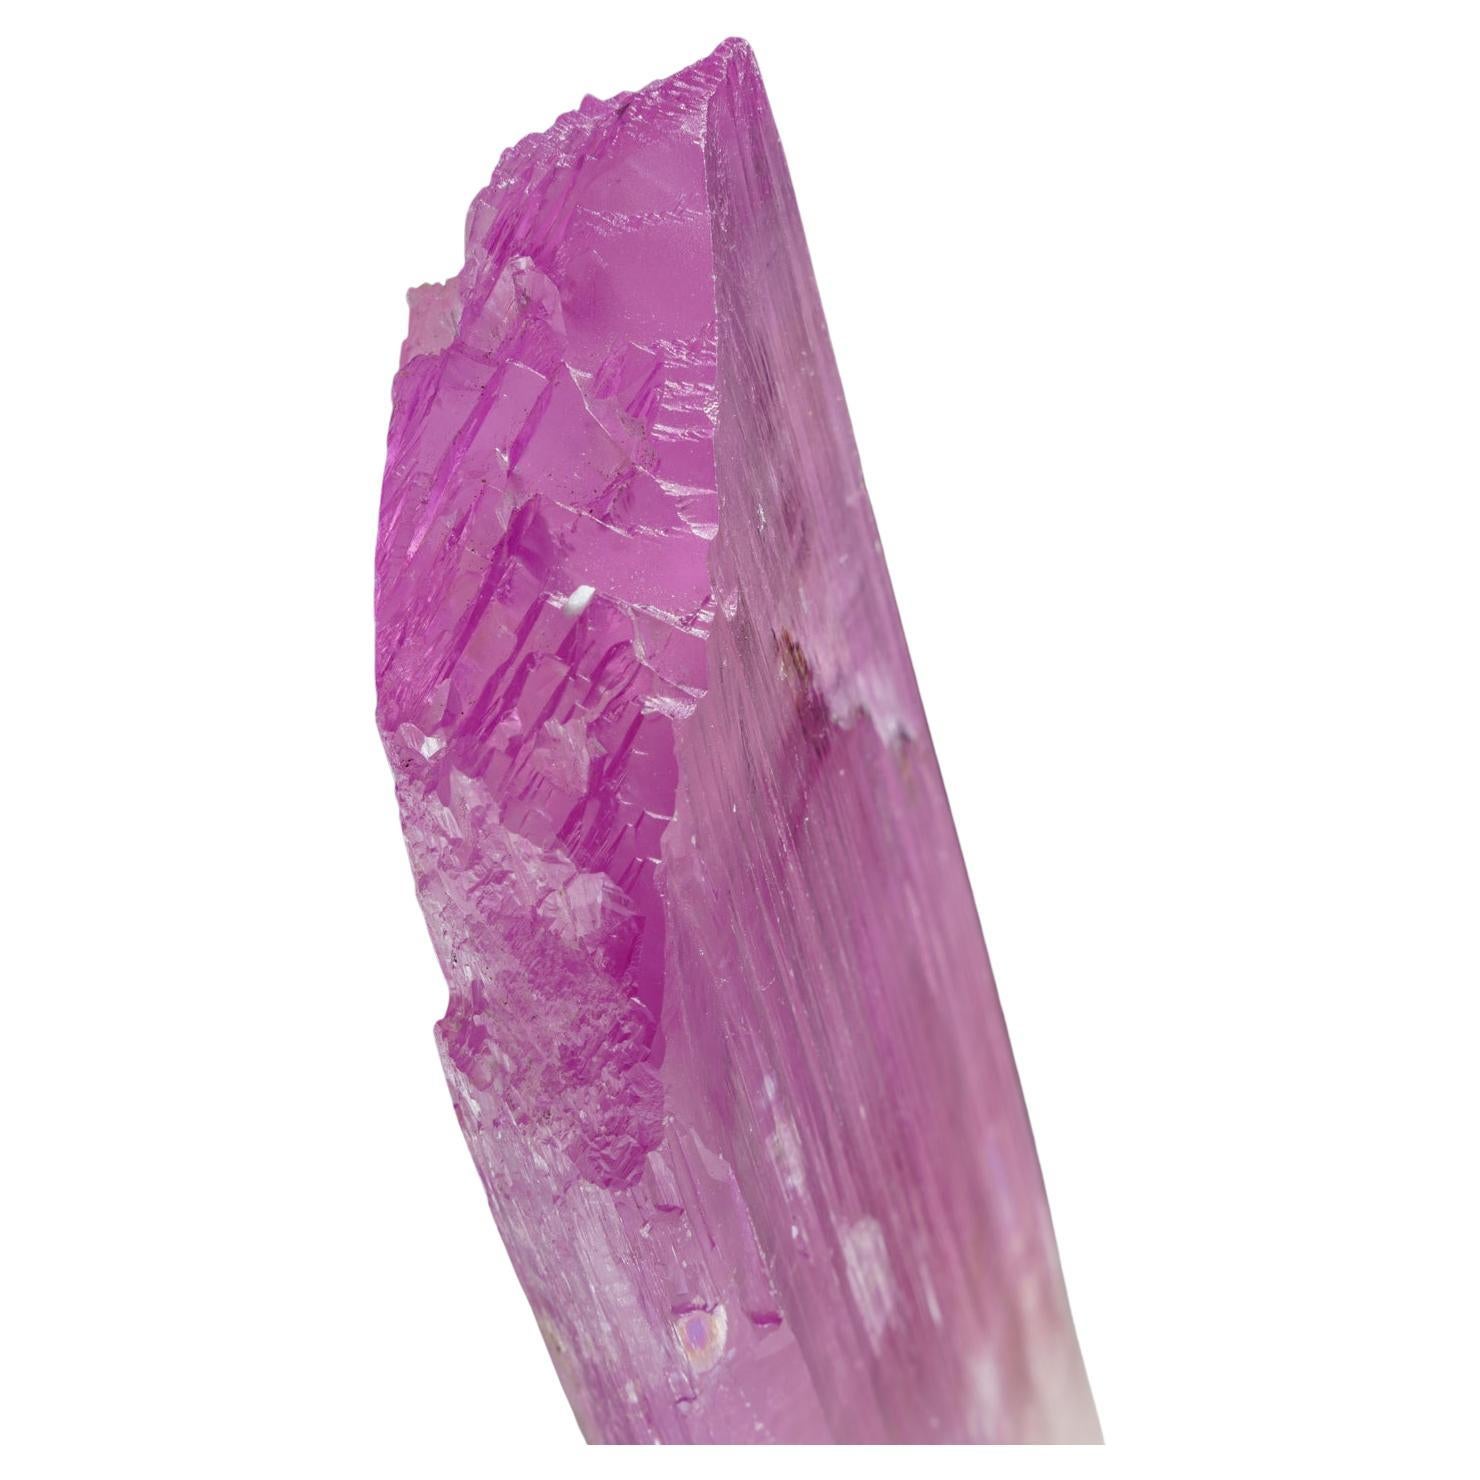 Fully terminated single crystal of transparent gem quality spodumene var. Kunzite. The crystal faces are composed of smaller lustrous parallel crystal faces.

Kunzite is a beautiful crystal, pure in energy and joyful in nature. In palest pink to